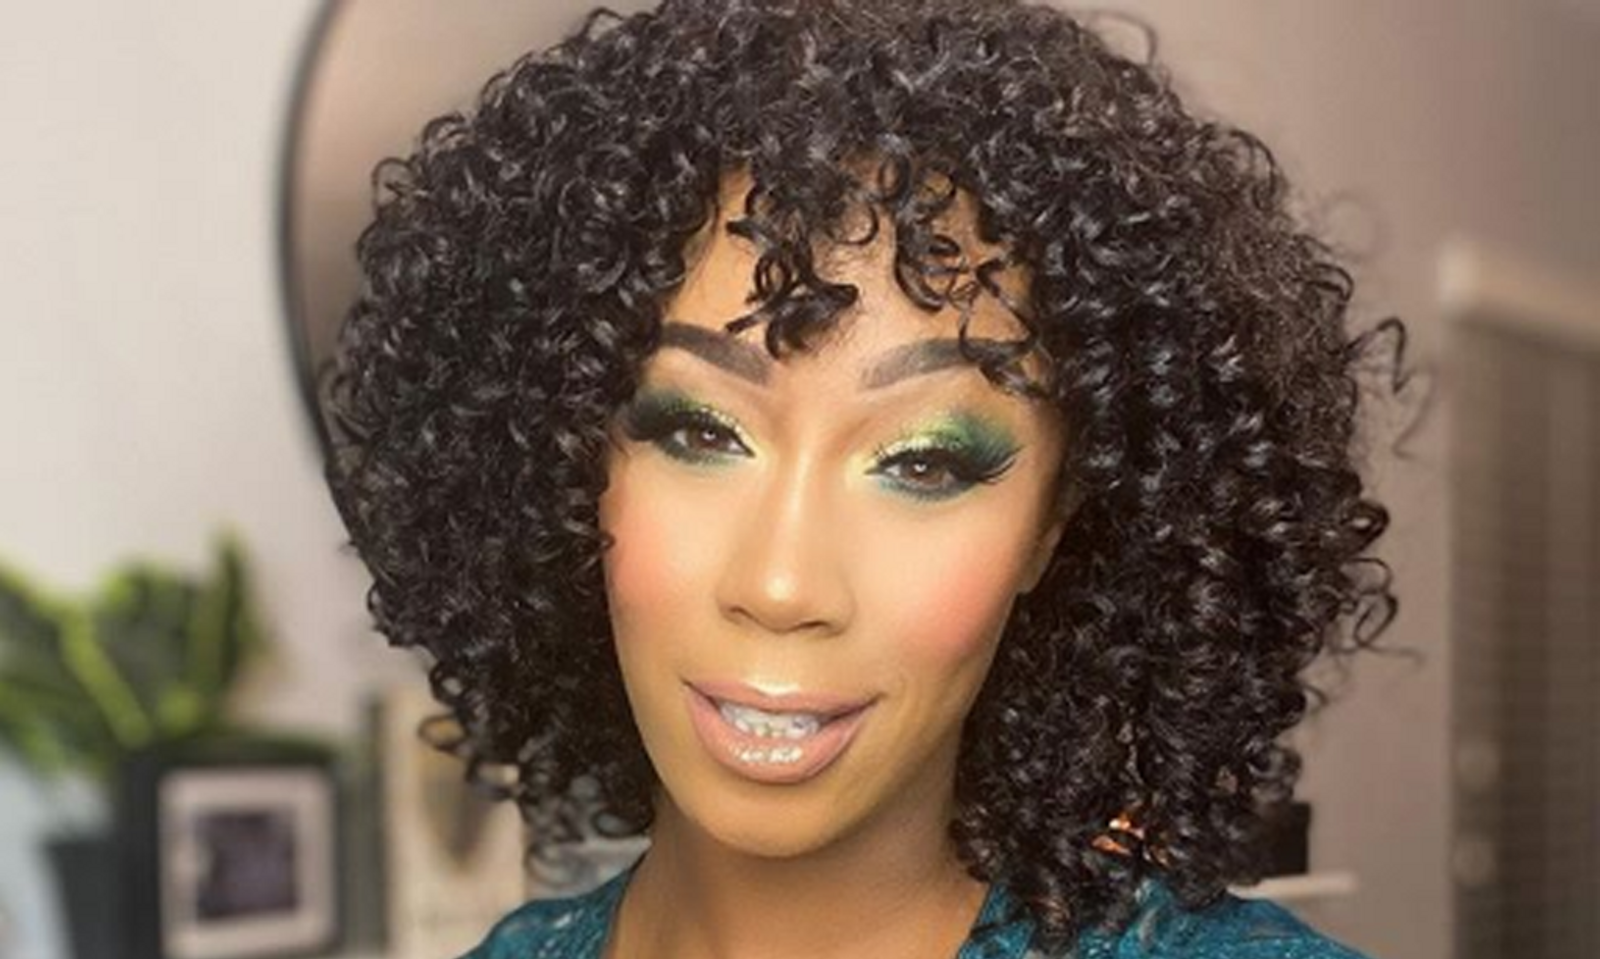 Misty Stone Wraps on New Adam & Eve Comedy Feature